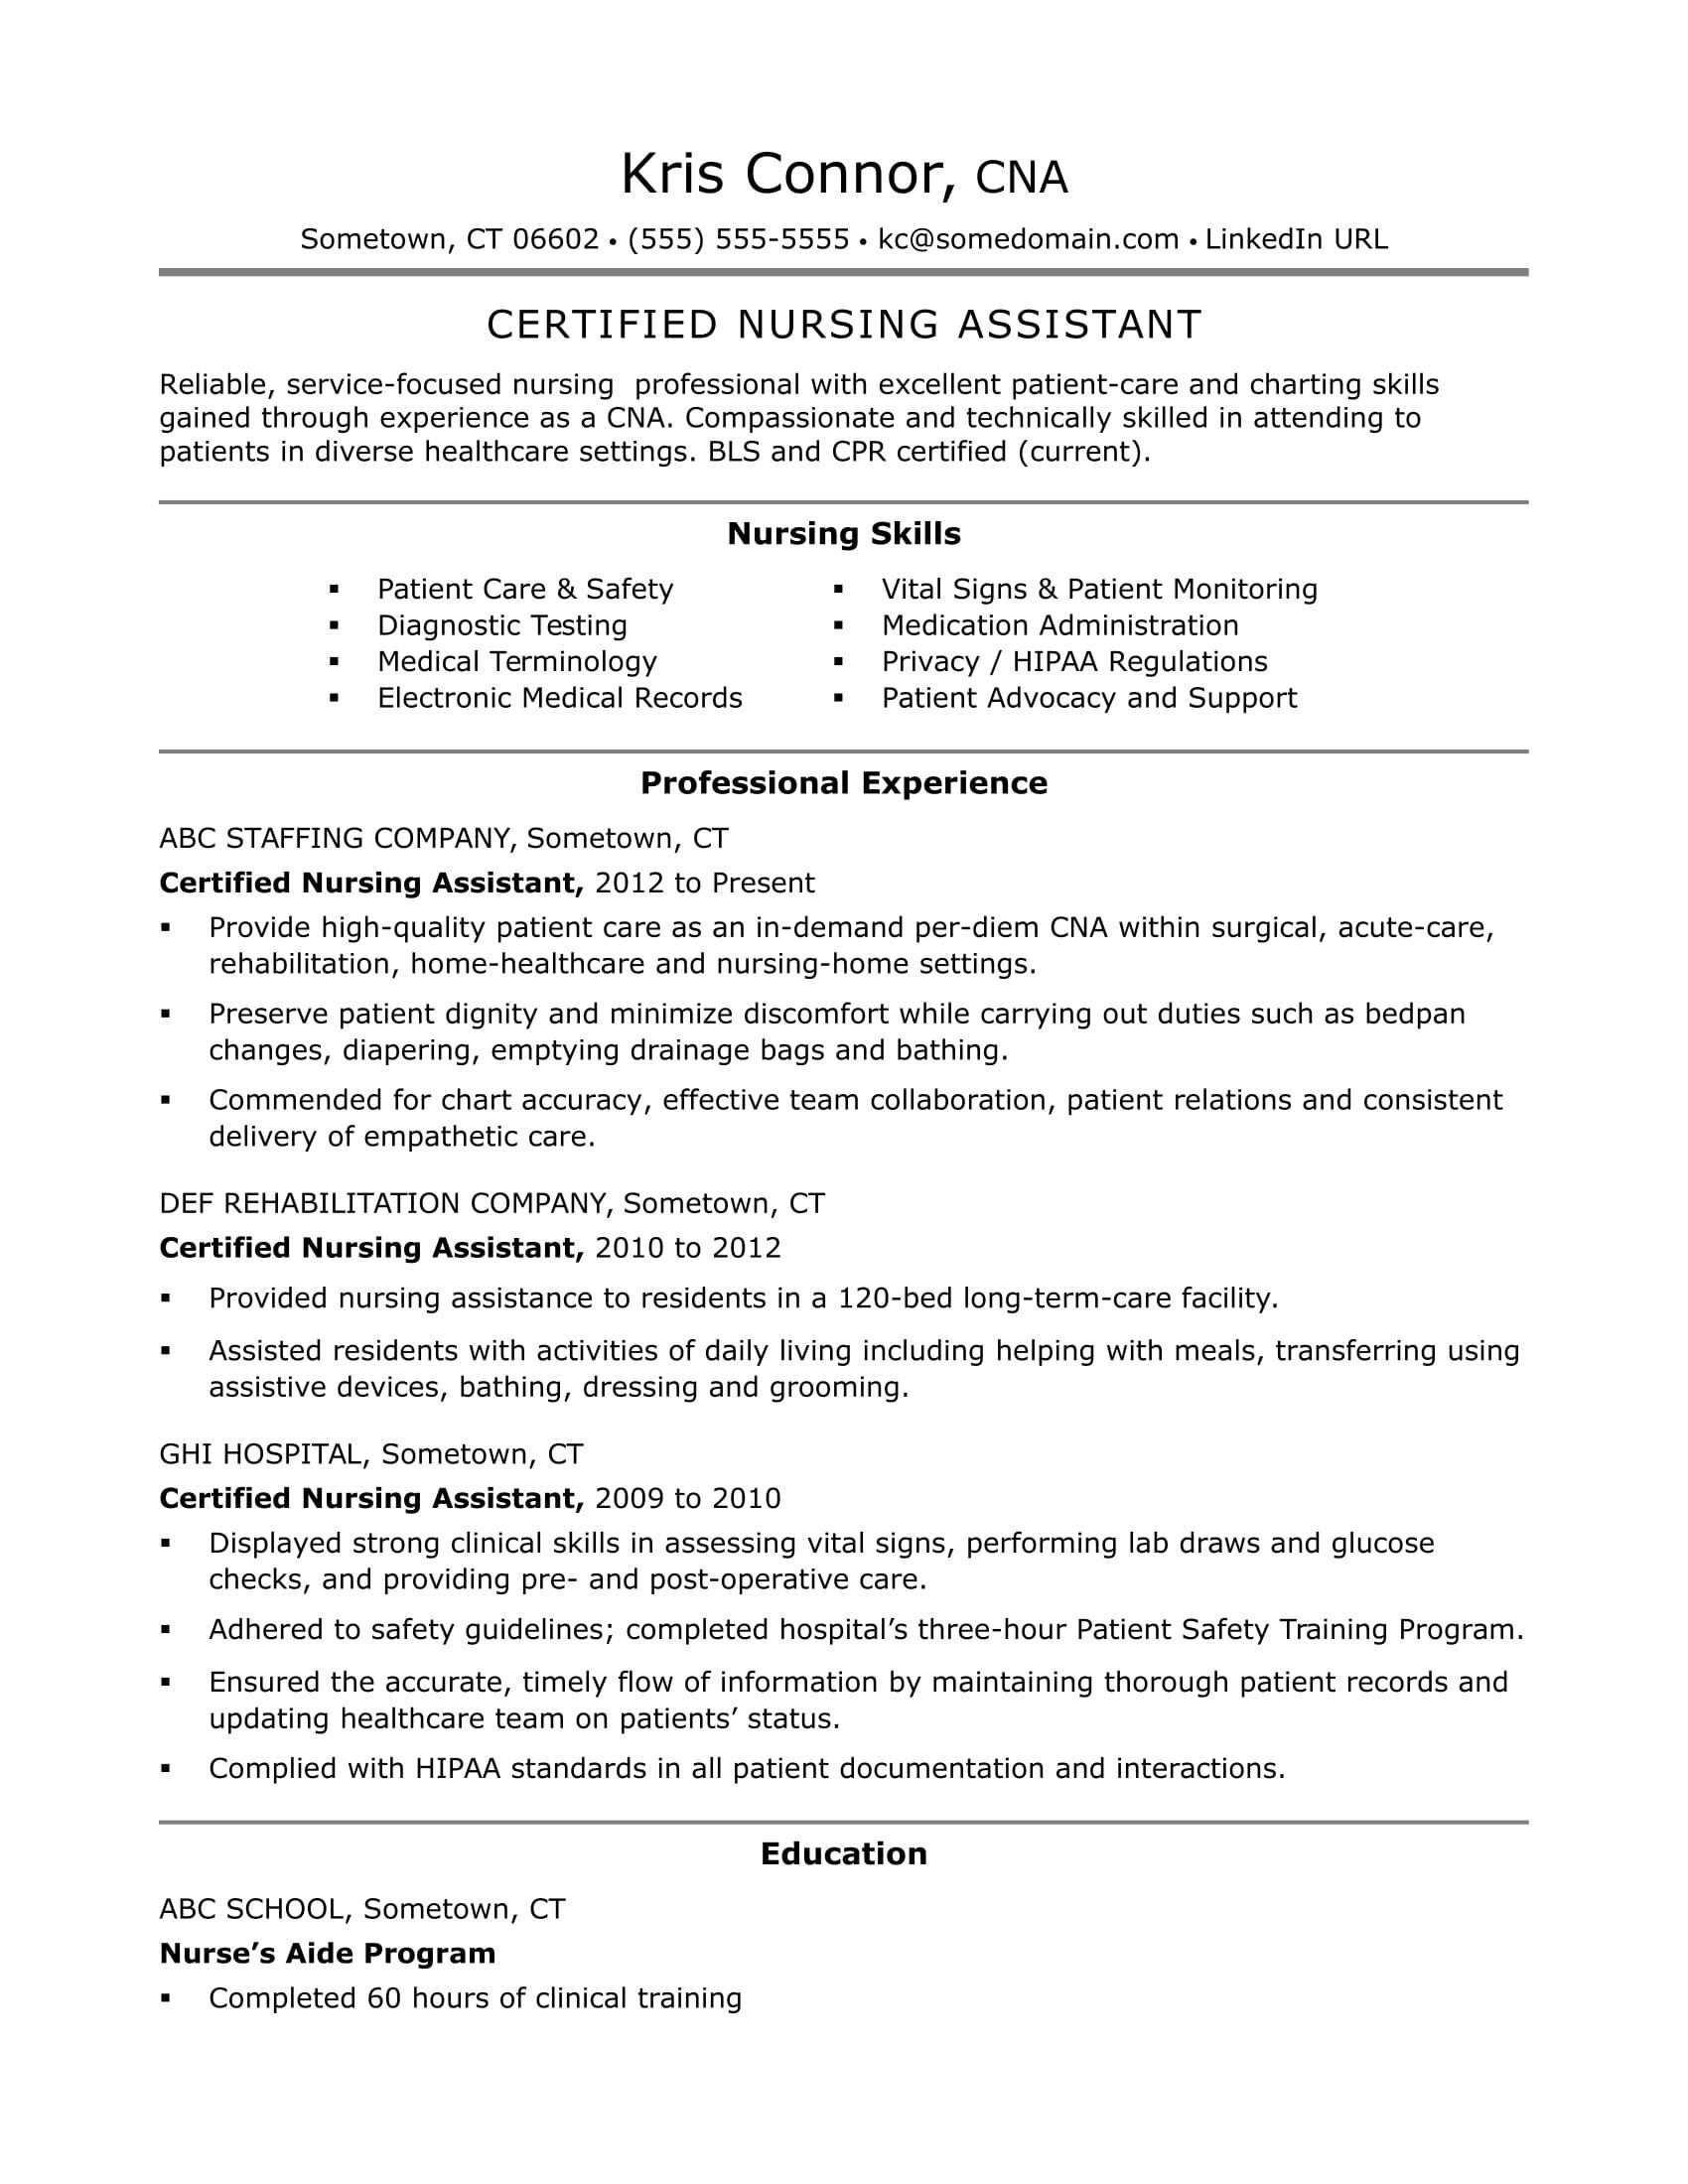 Sample Resume for Experienced Nursing assistant Pin On Cna